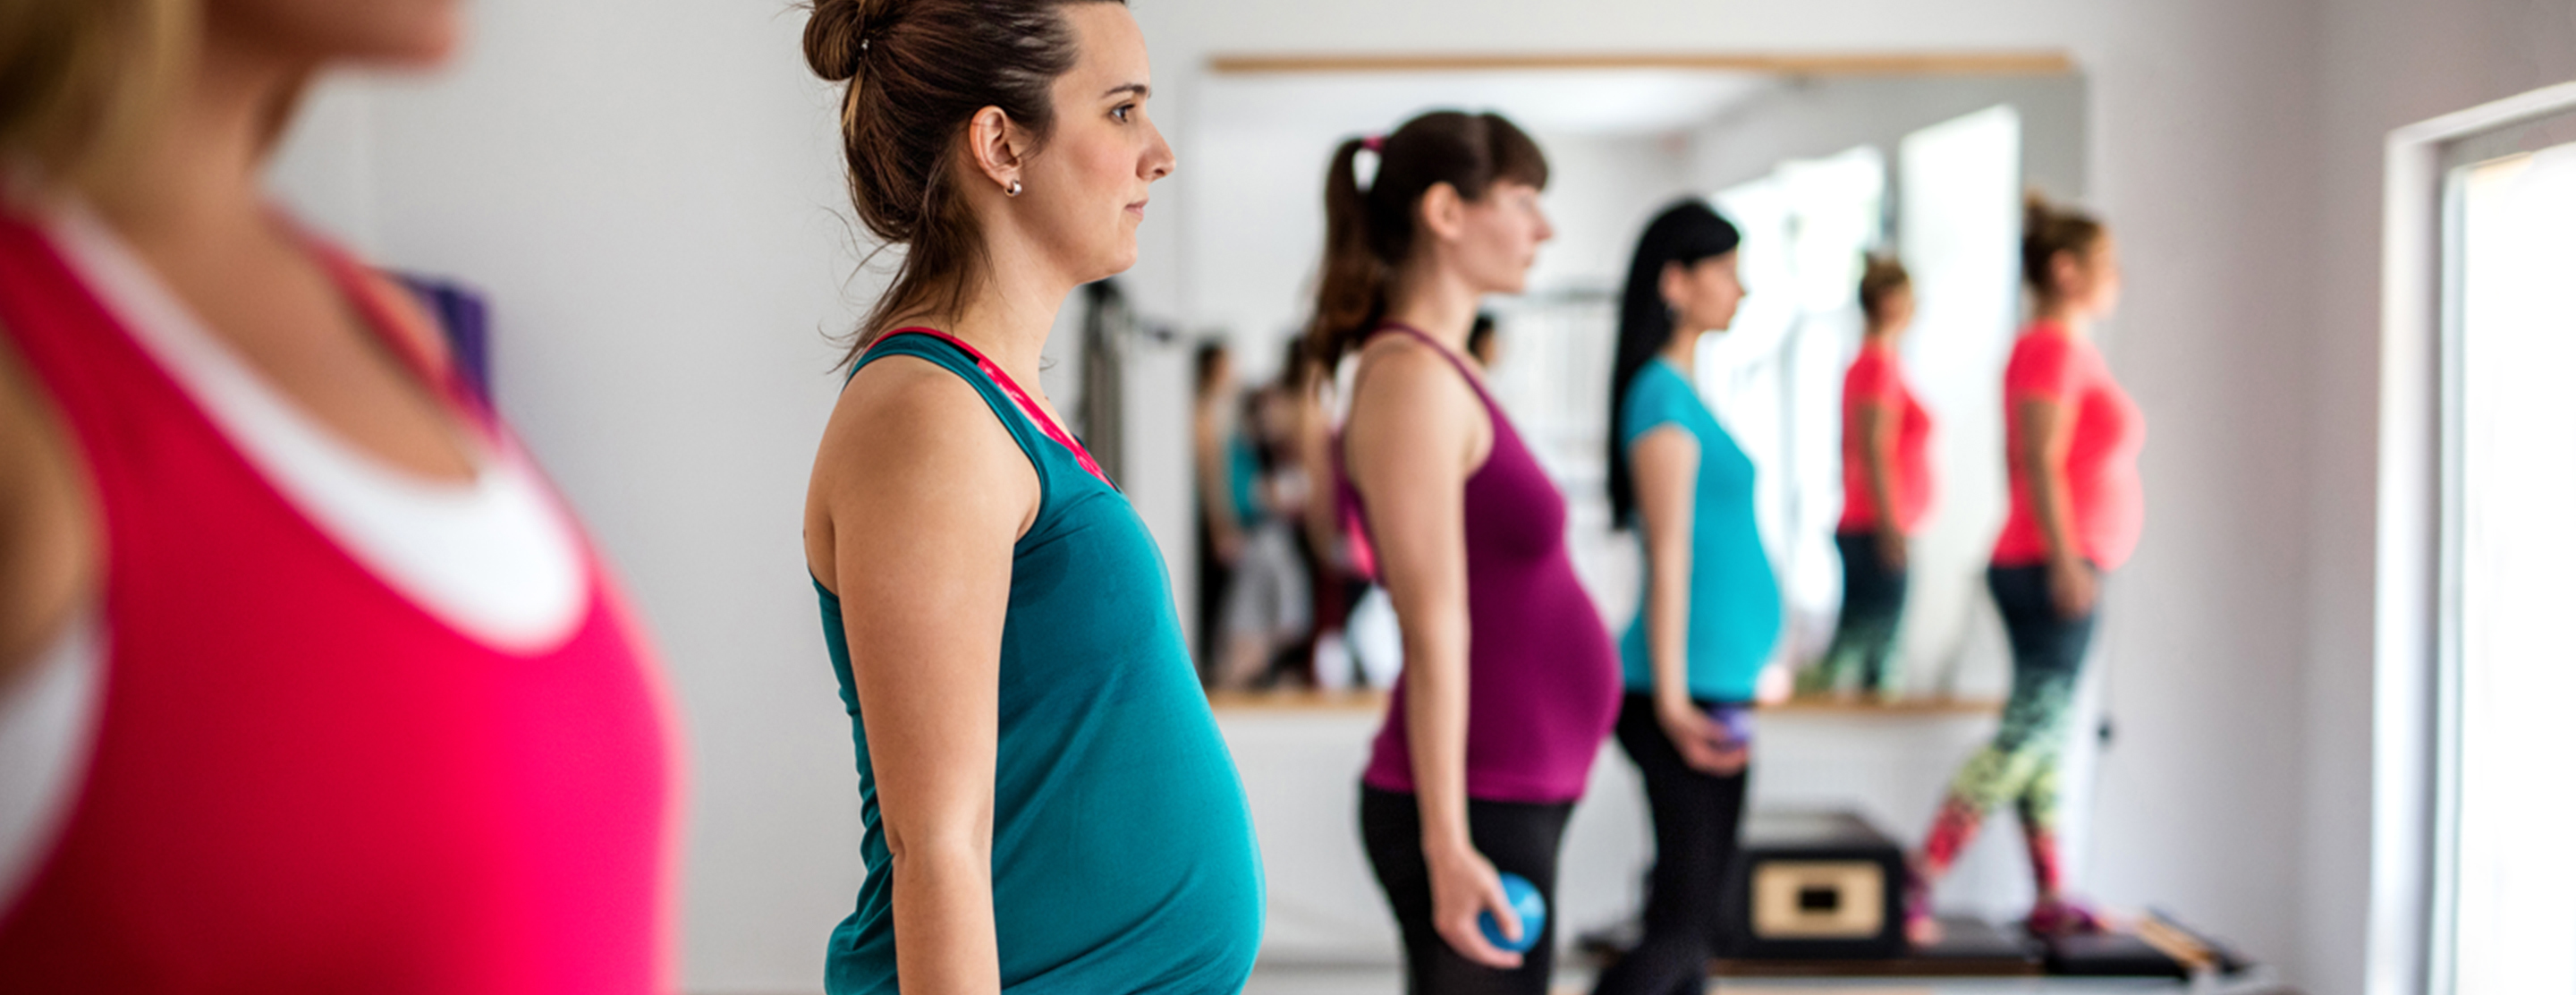 Everything you need to know about exercise in pregnancy